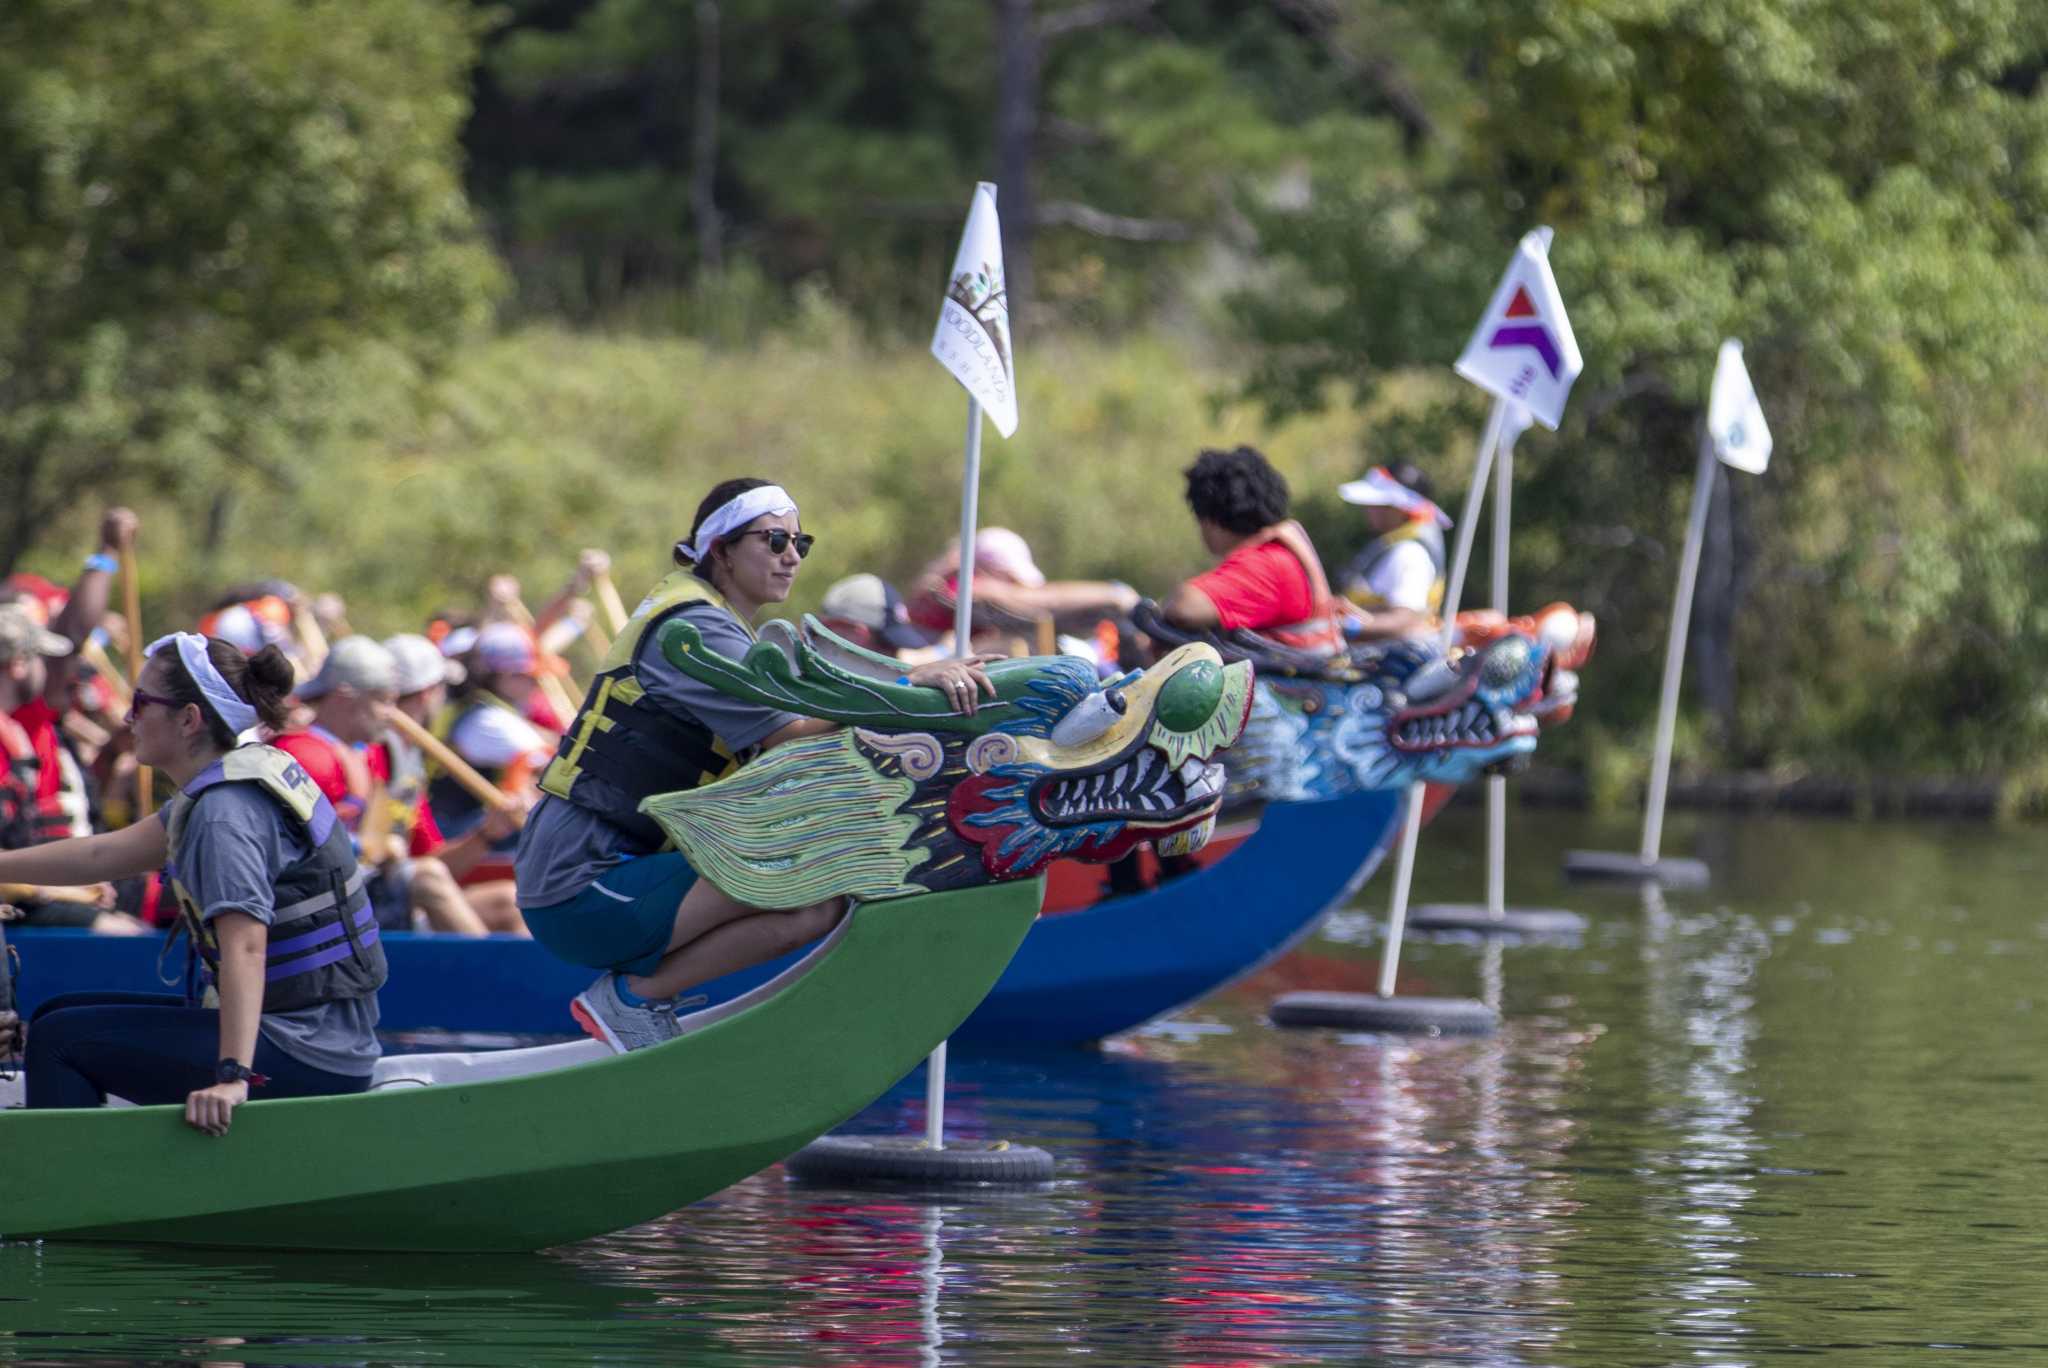 Several dragon boats with paddlers and flags.